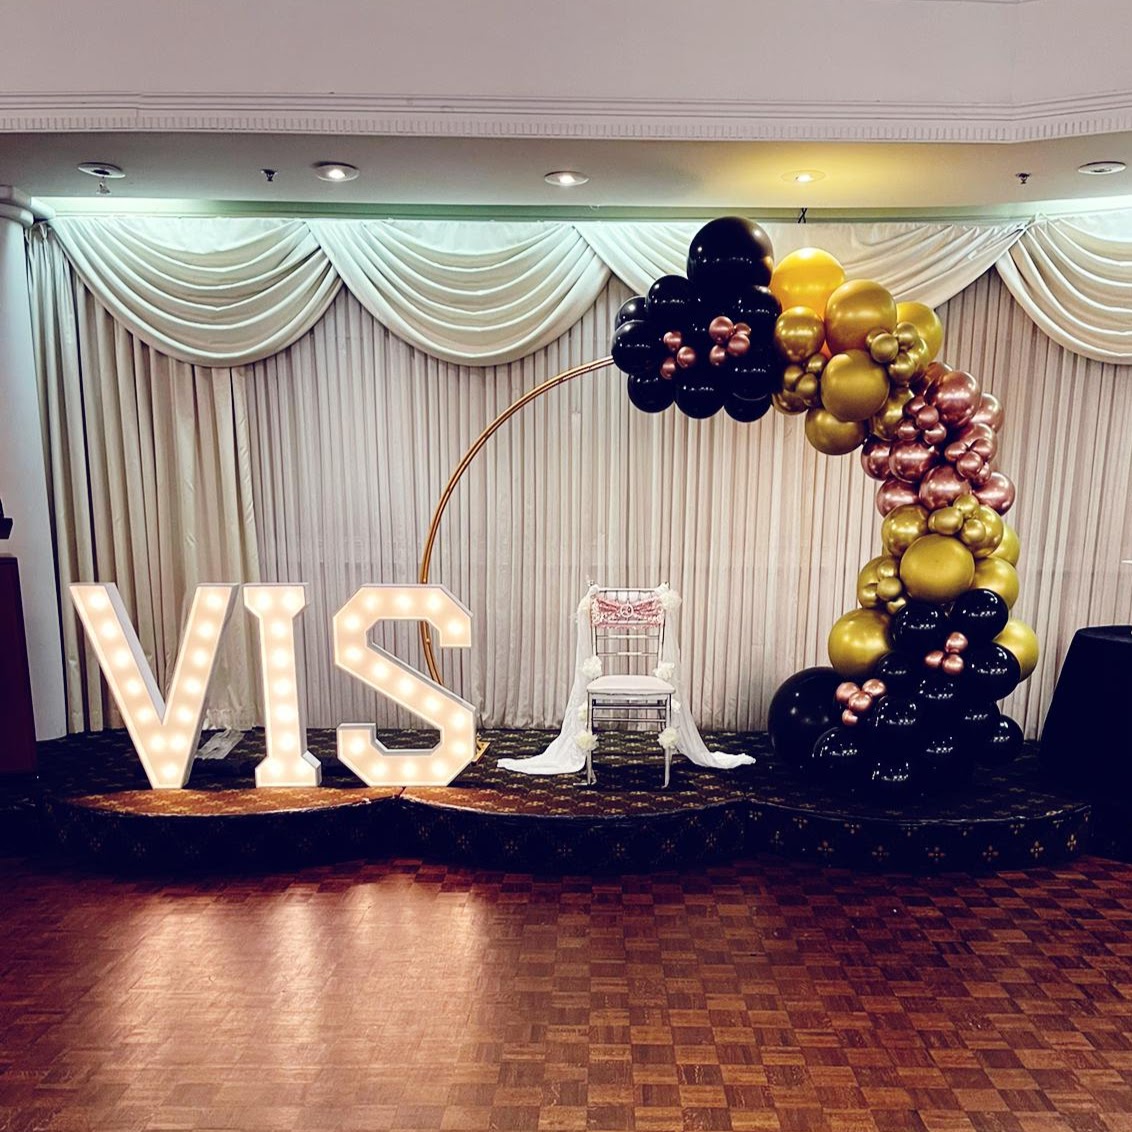 Affordable marquee letter rentals in Toronto: Mr. & Mrs.